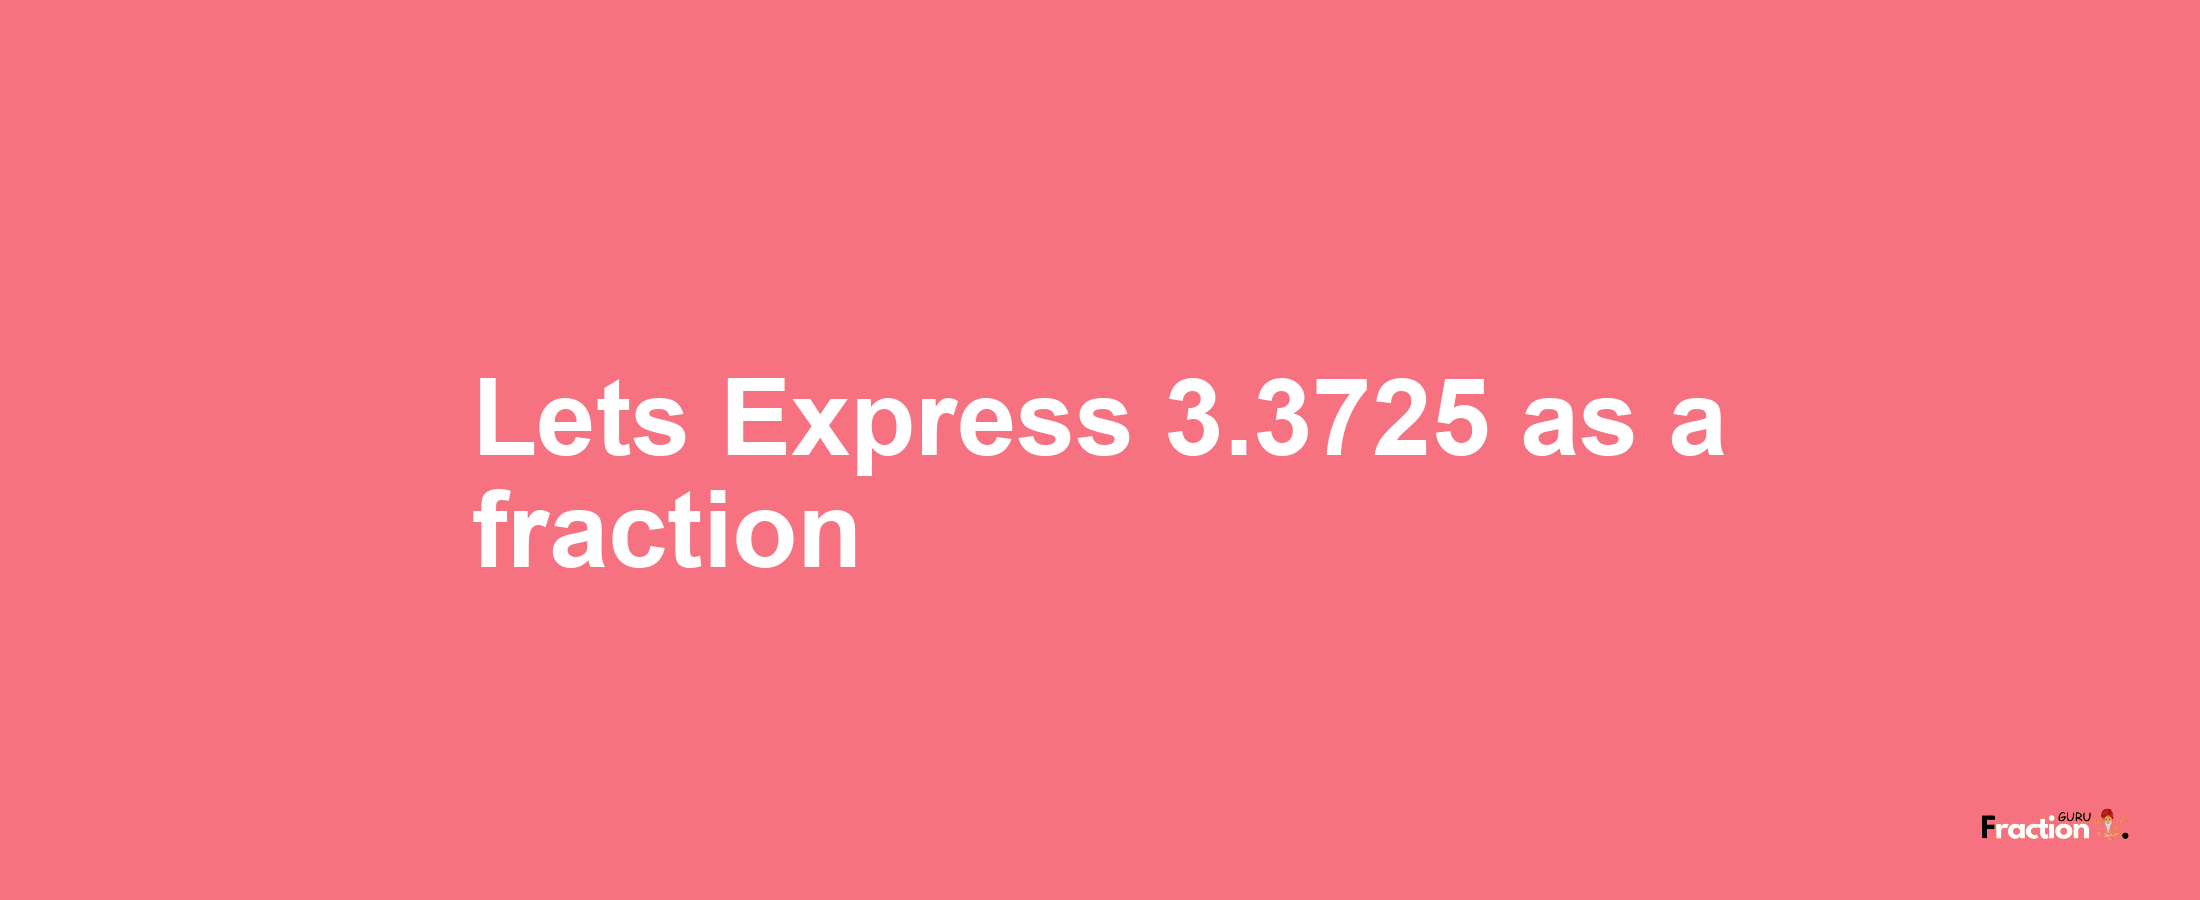 Lets Express 3.3725 as afraction